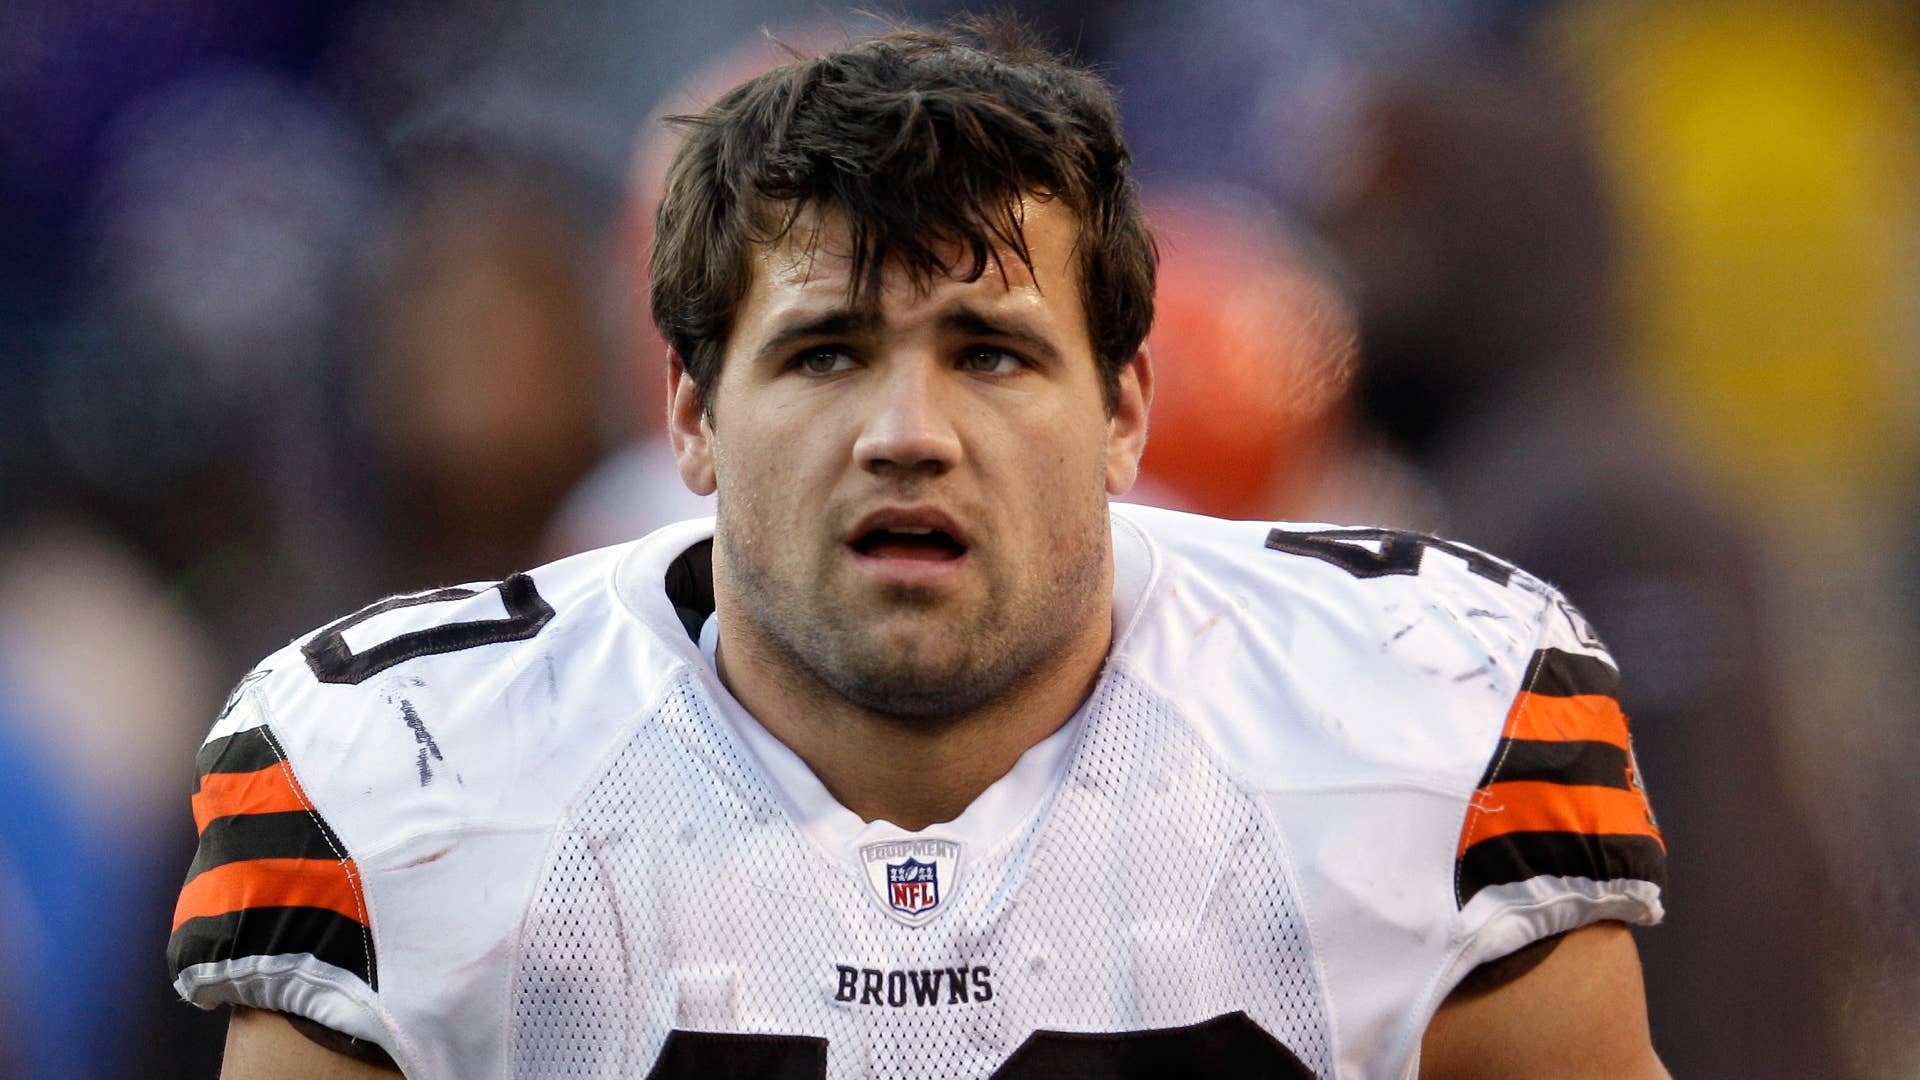 Peyton Hillis of the Cleveland Browns looks on from the sidelines.